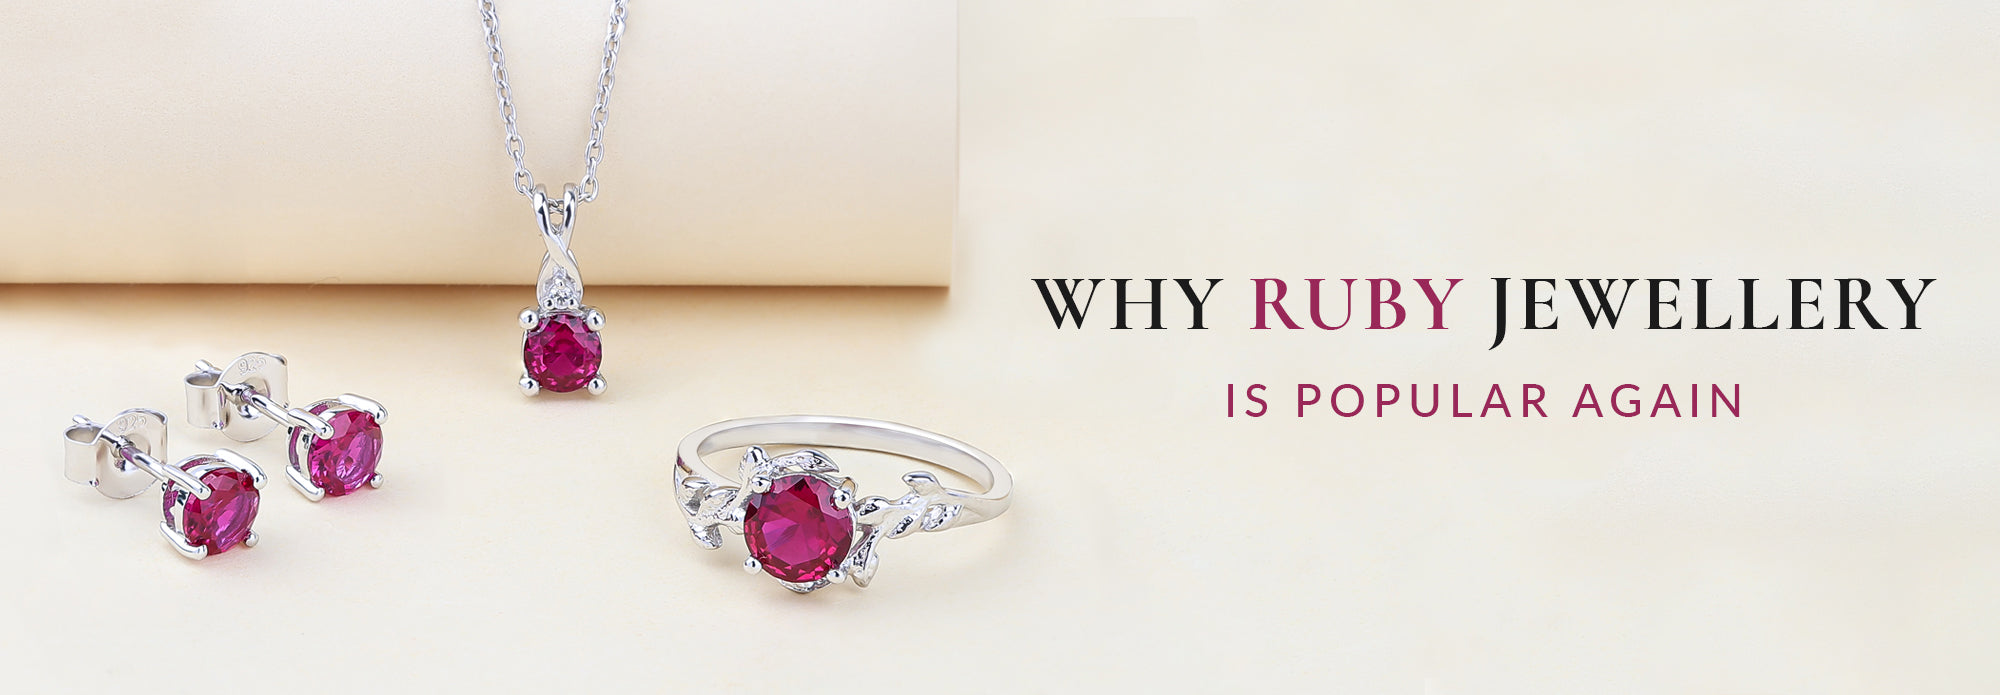 Why Ruby Jewellery Is Popular Again